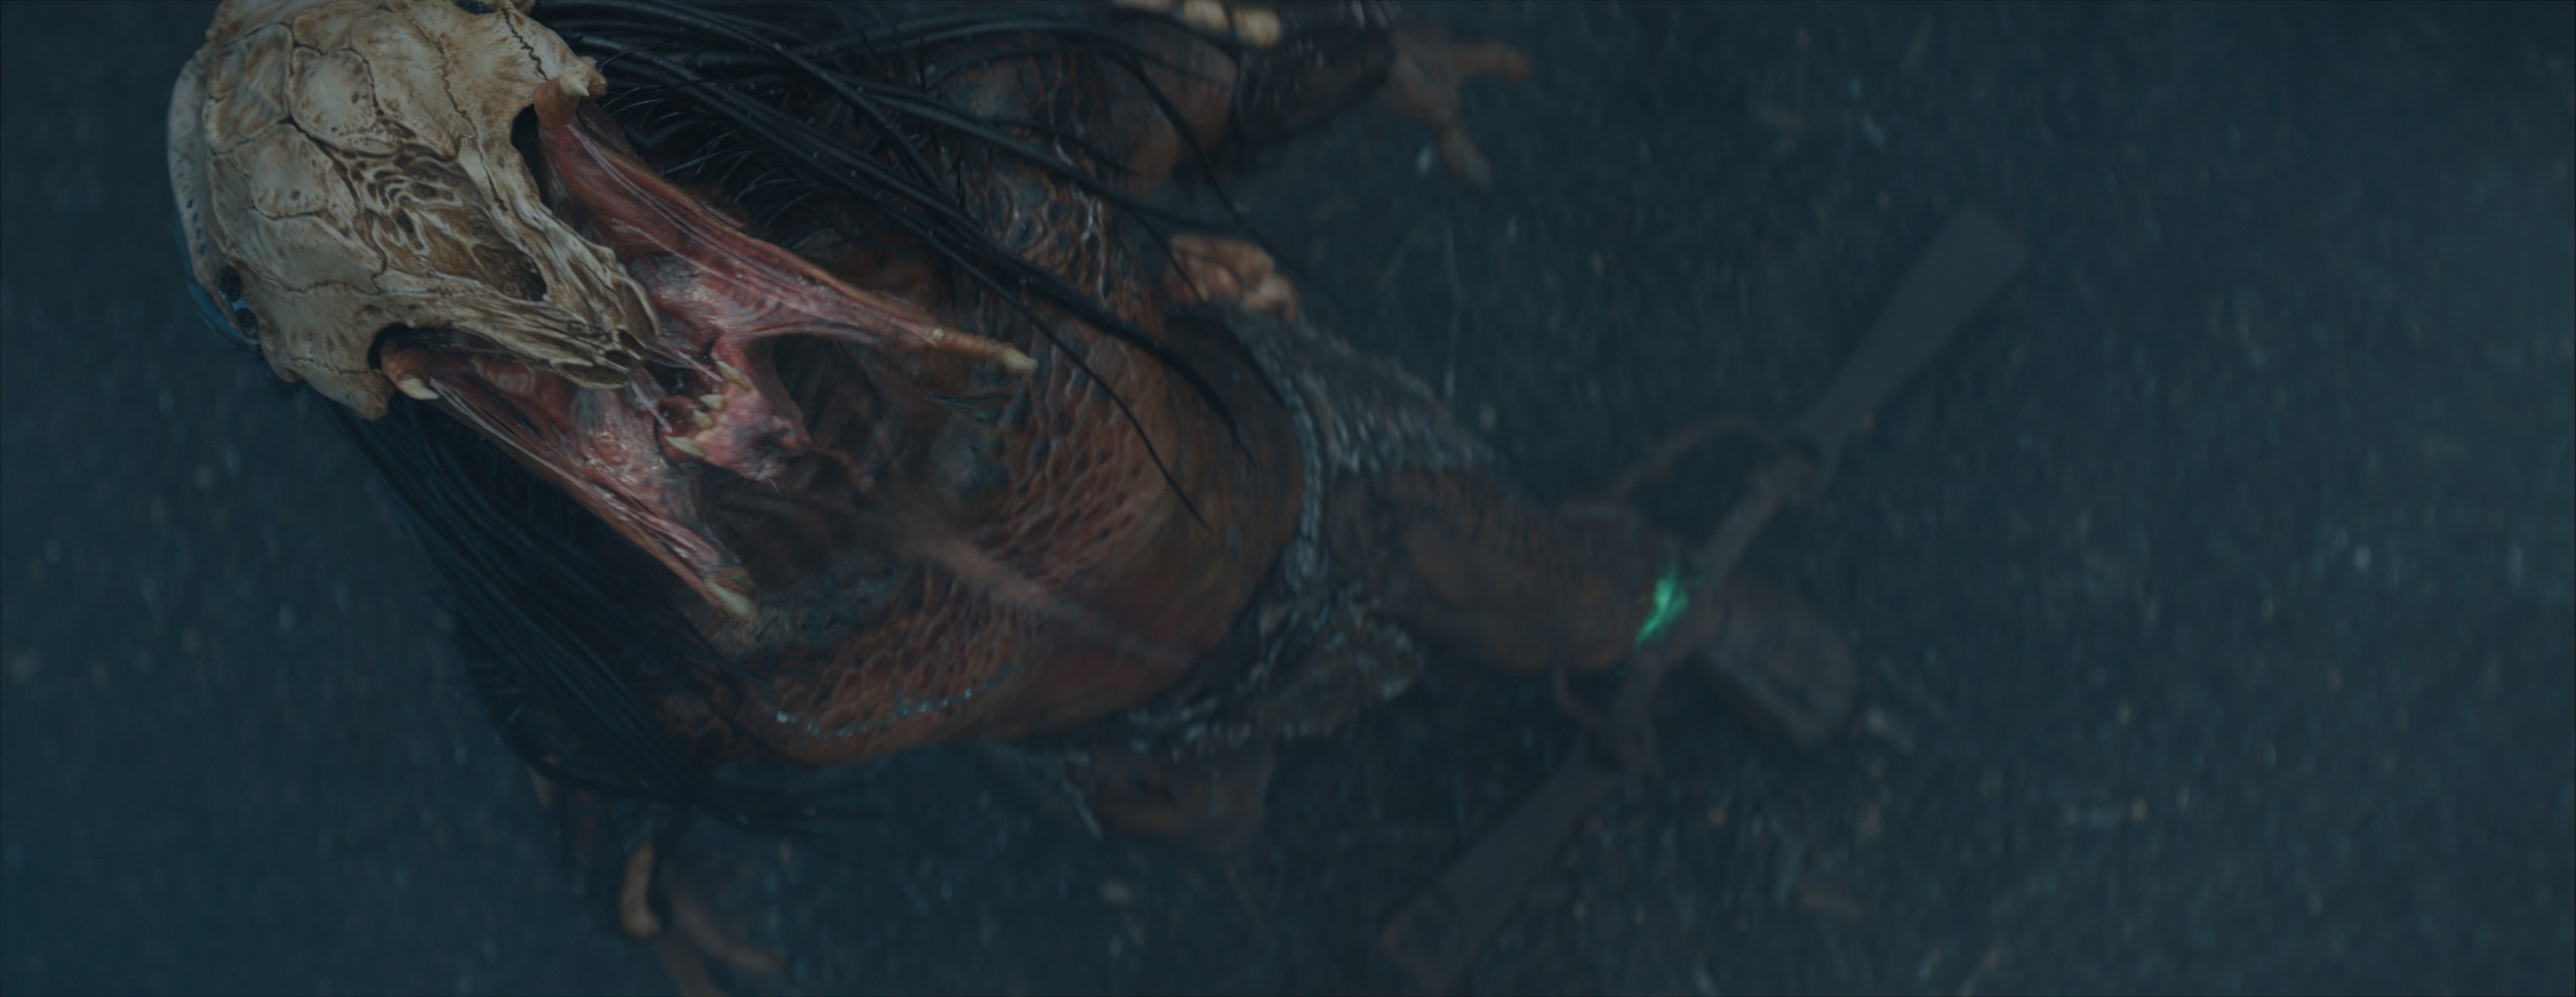 An overhead shot of the Predator roaring from the film Prey, after visual effects are applied.